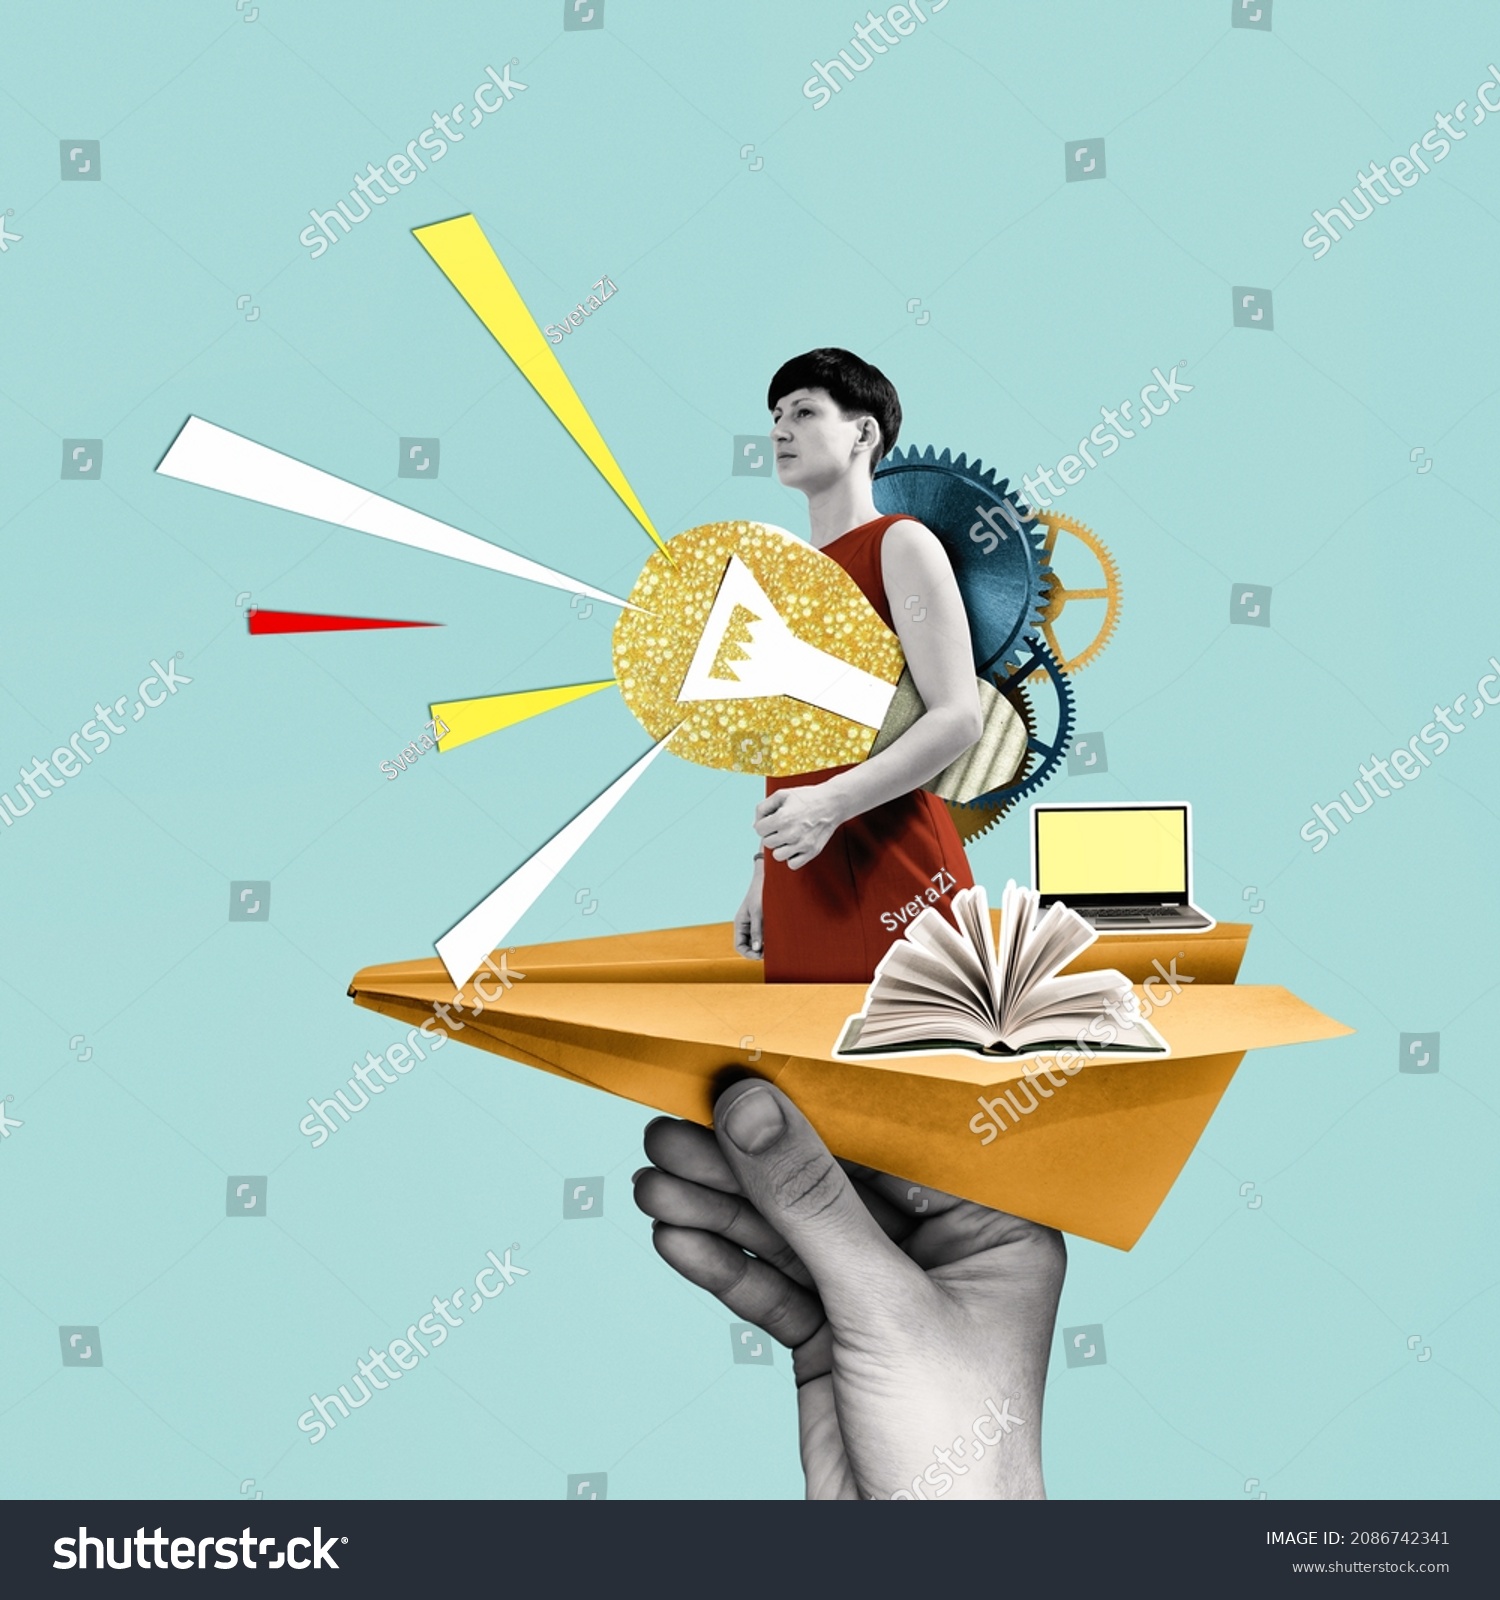 Woman with a light bulb in a paper airplane. Creativity and uniqueness in business and education. Art collage. #2086742341